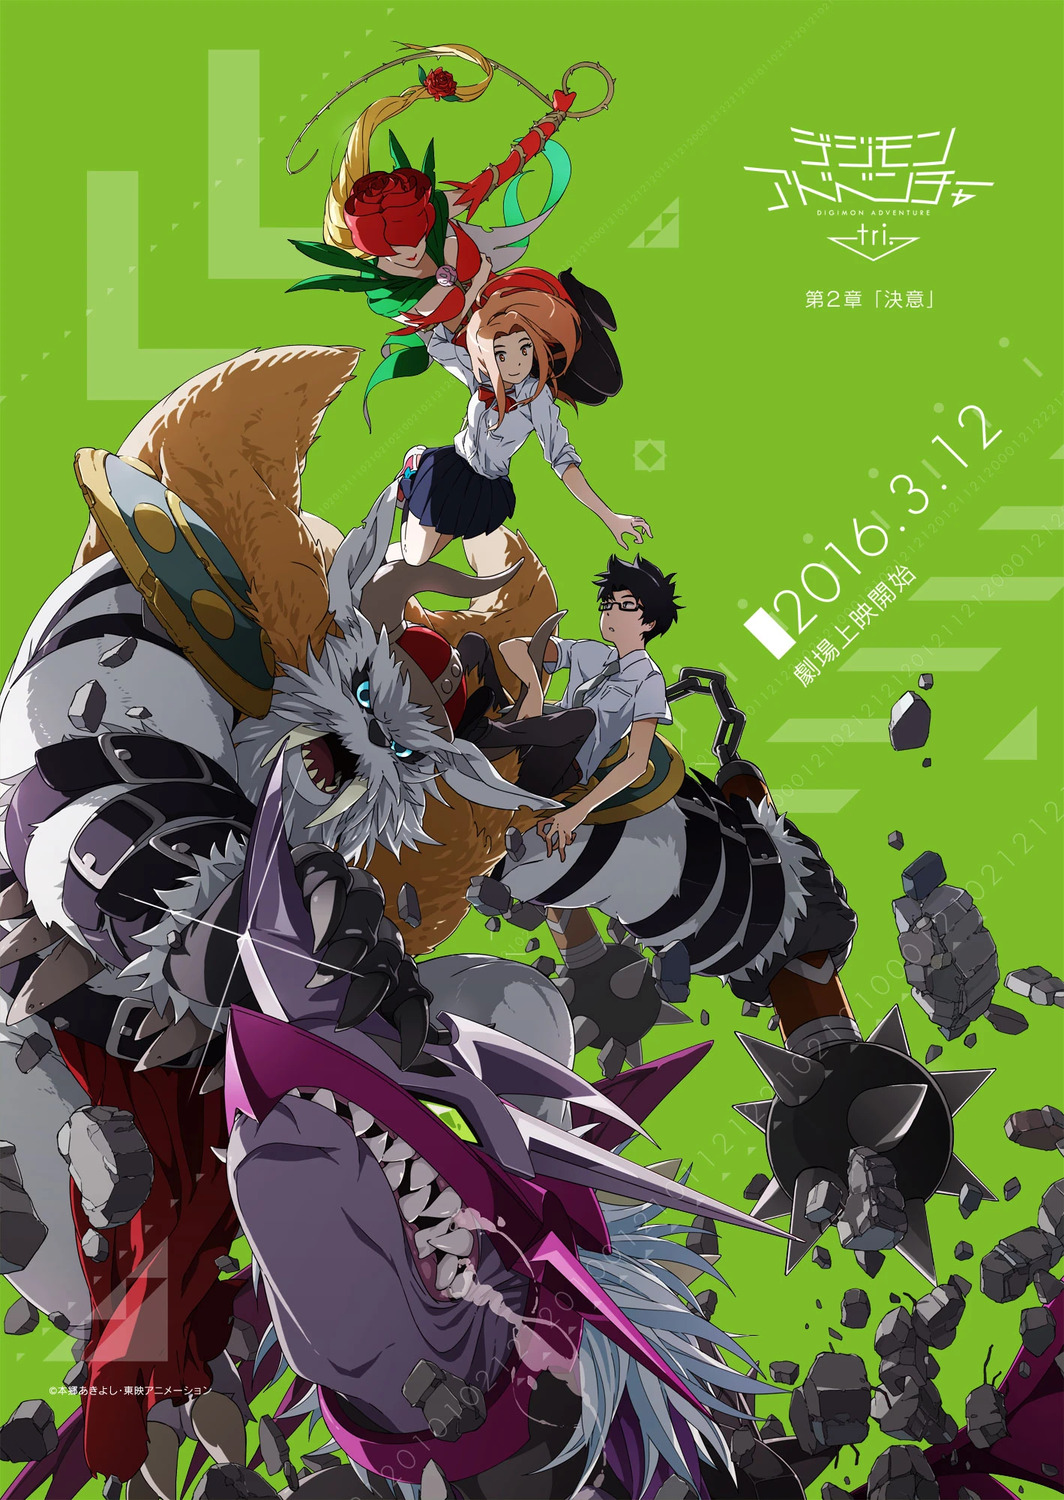 Extra Large Movie Poster Image for Digimon Adventure tri. 2: Ketsui 